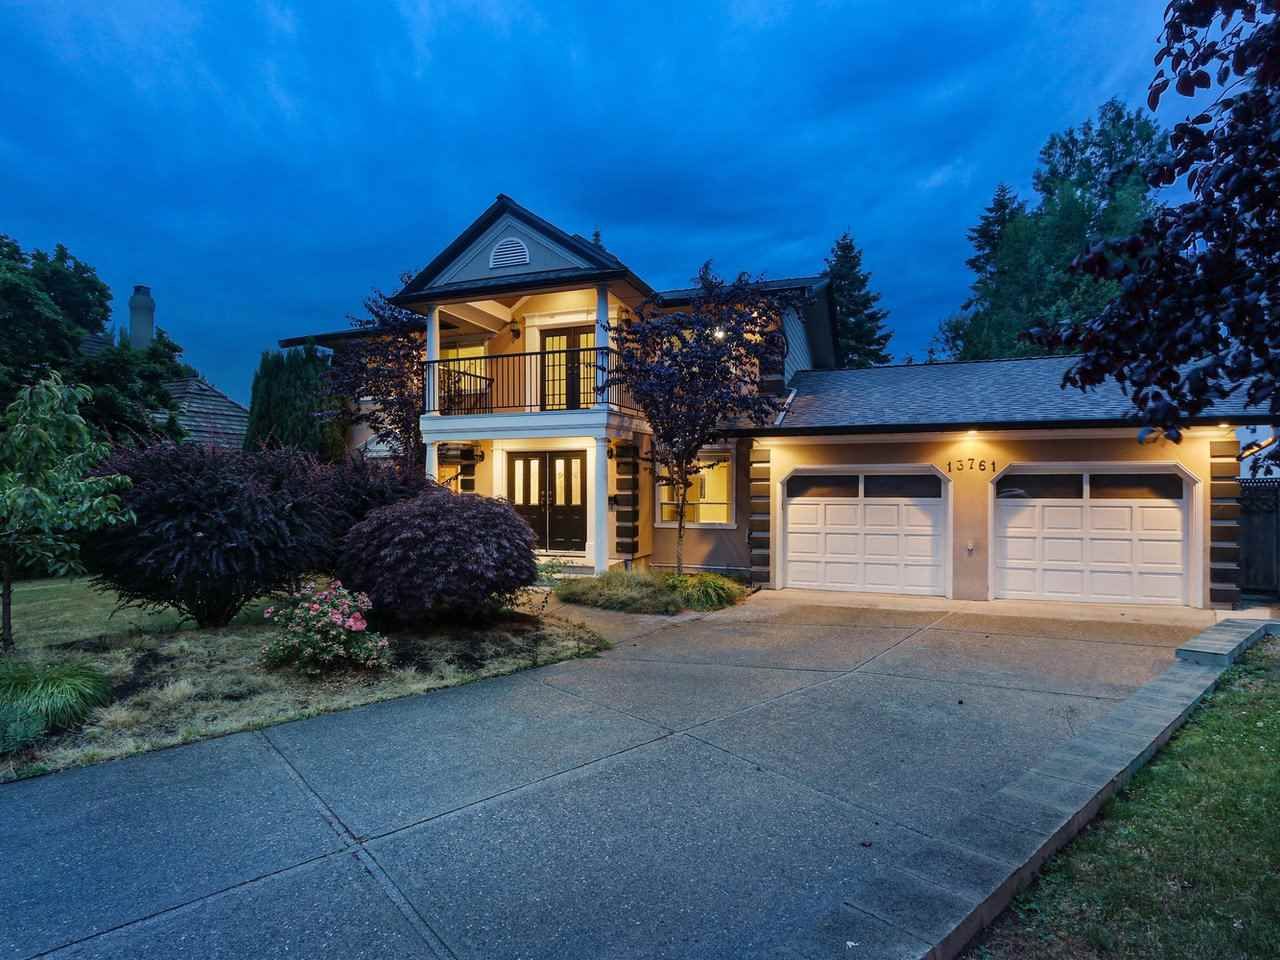 I have sold a property at 13761 18 AVENUE in Surrey
